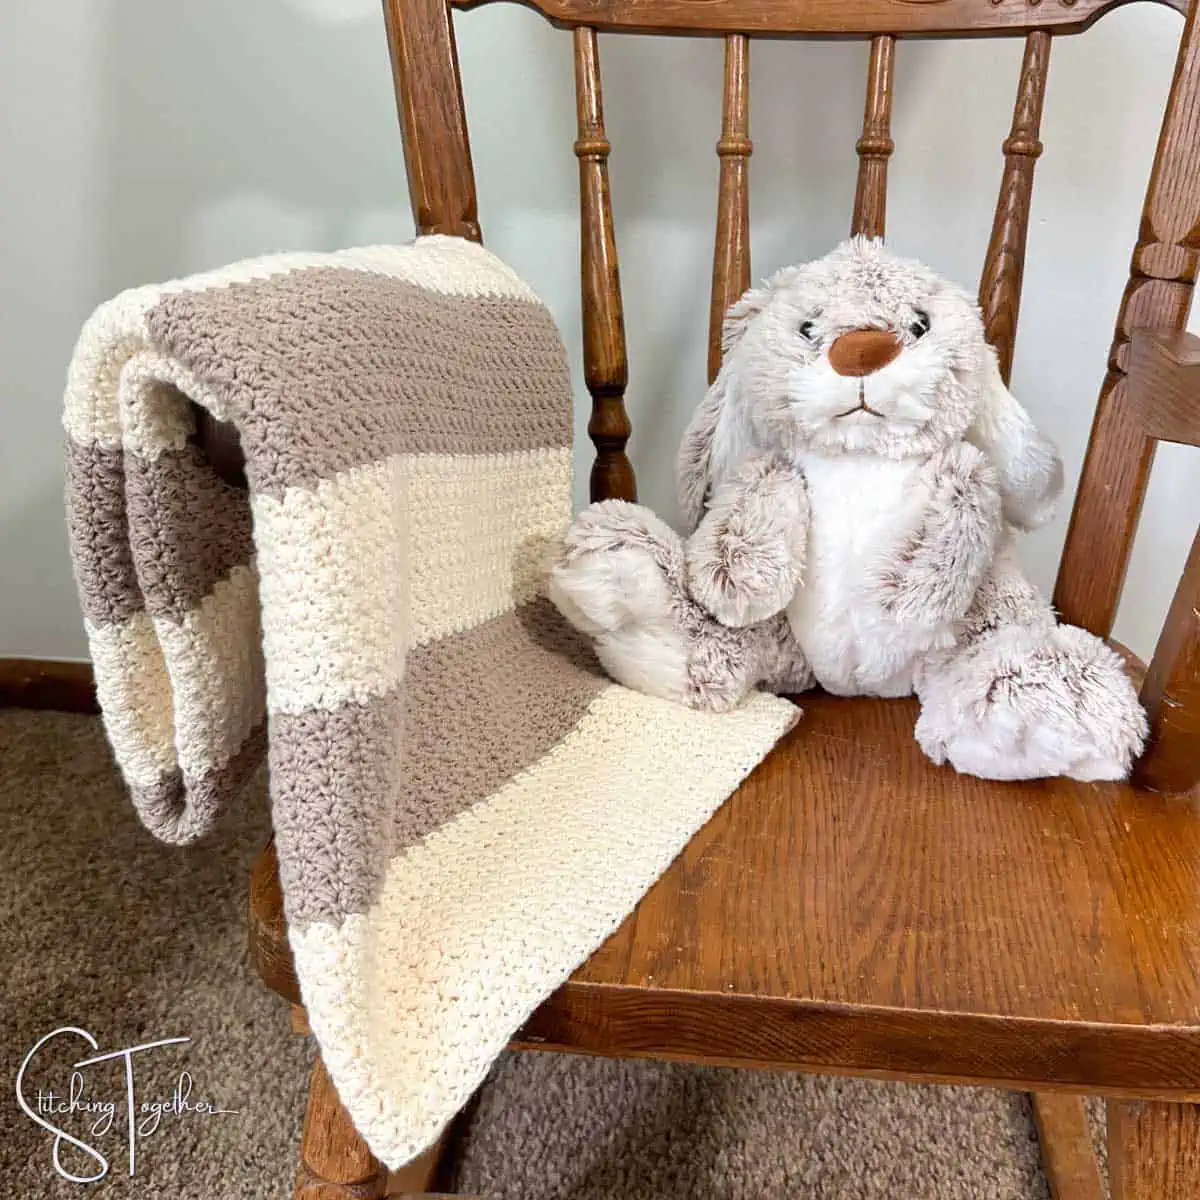 crochet baby blanket folded over the arm of a small rocking chair with a stuffed bunny on the seat